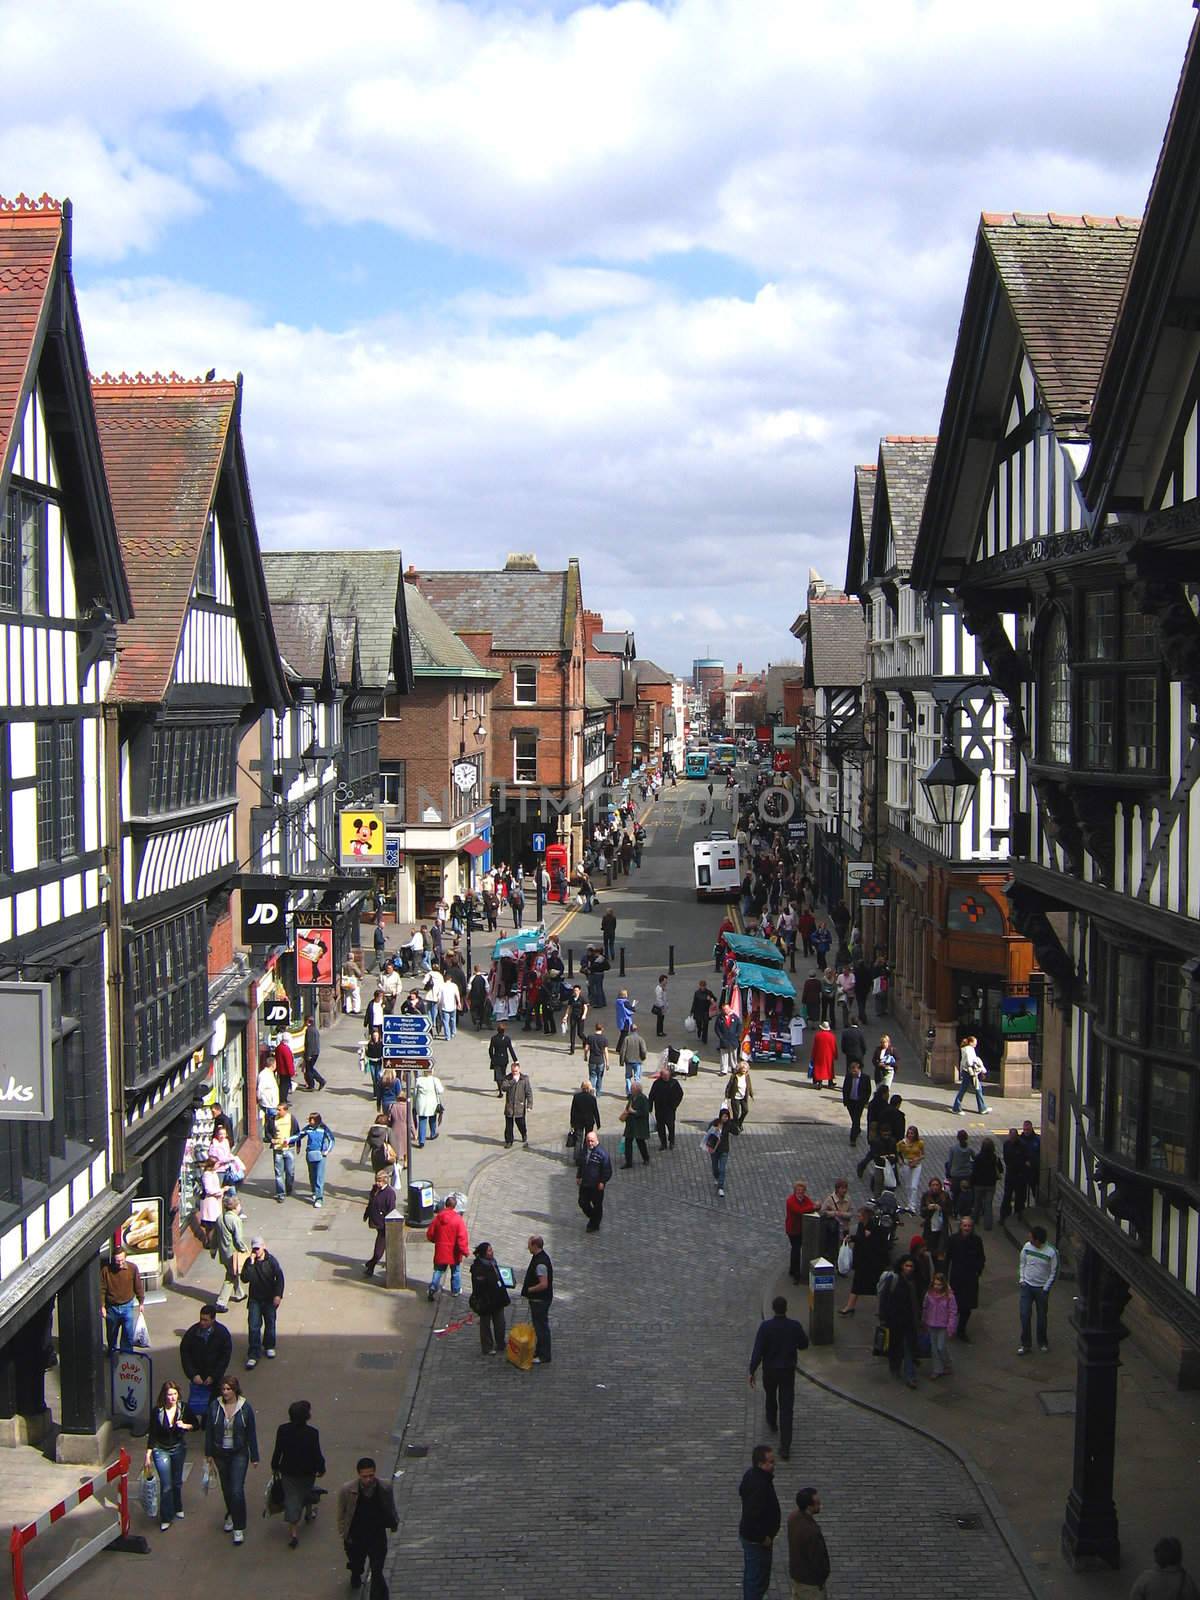 Shoppers in Chester by green308